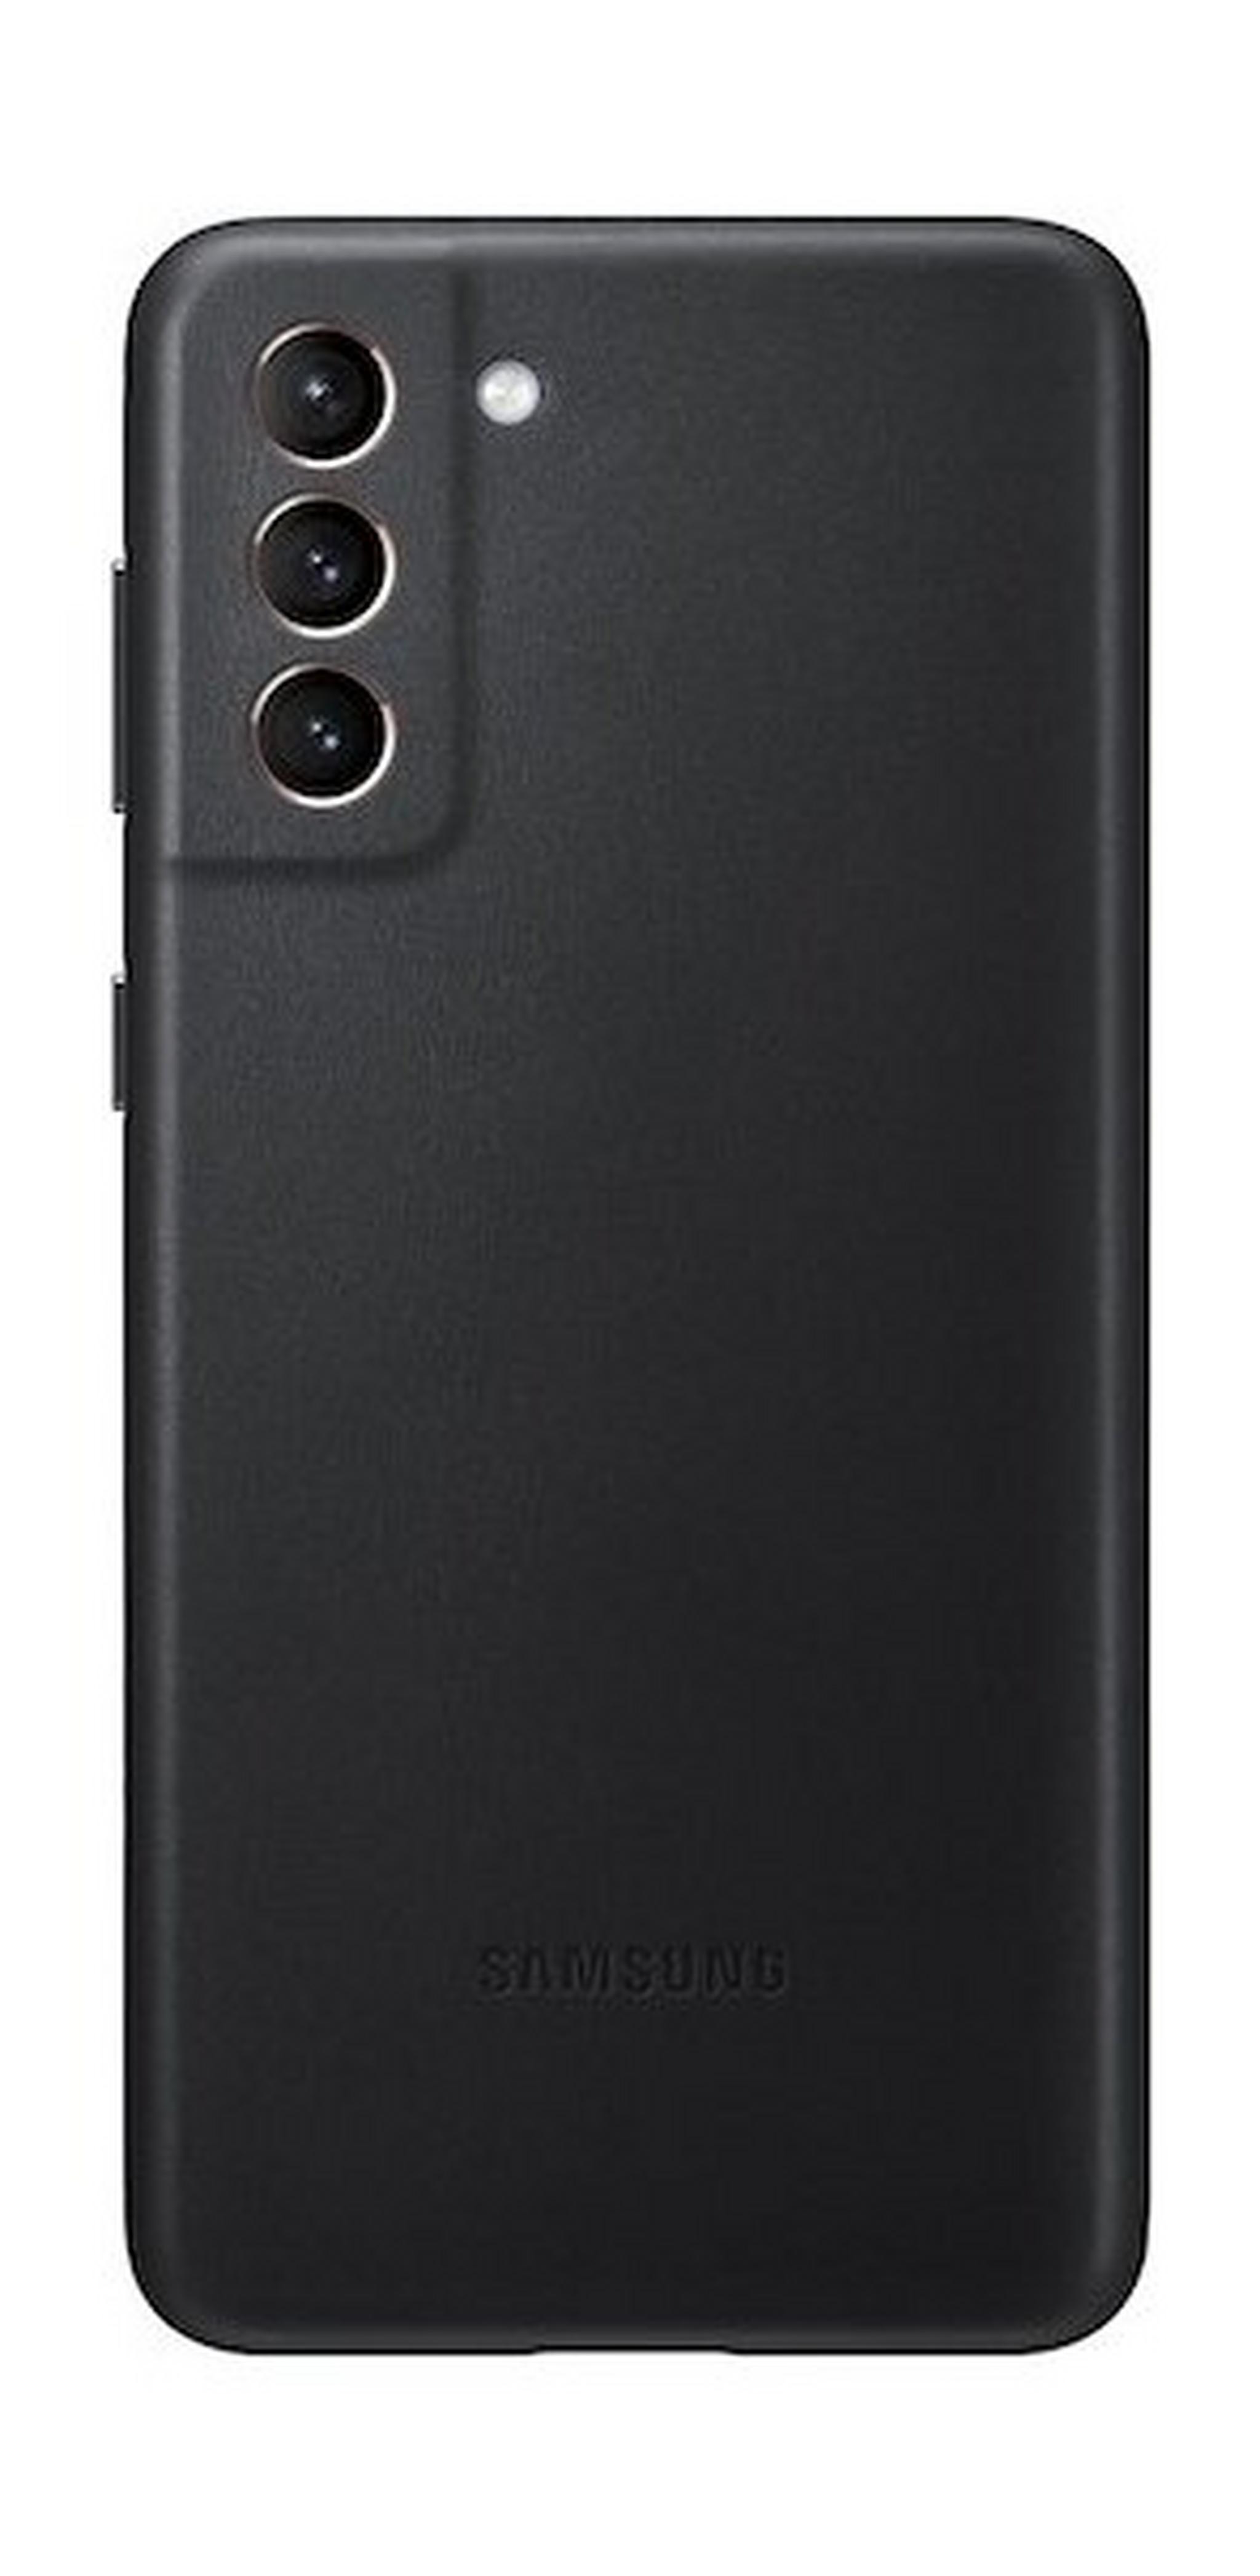 Samsung Galaxy S21 Ultra Leather Cover (VG998LB) - Black